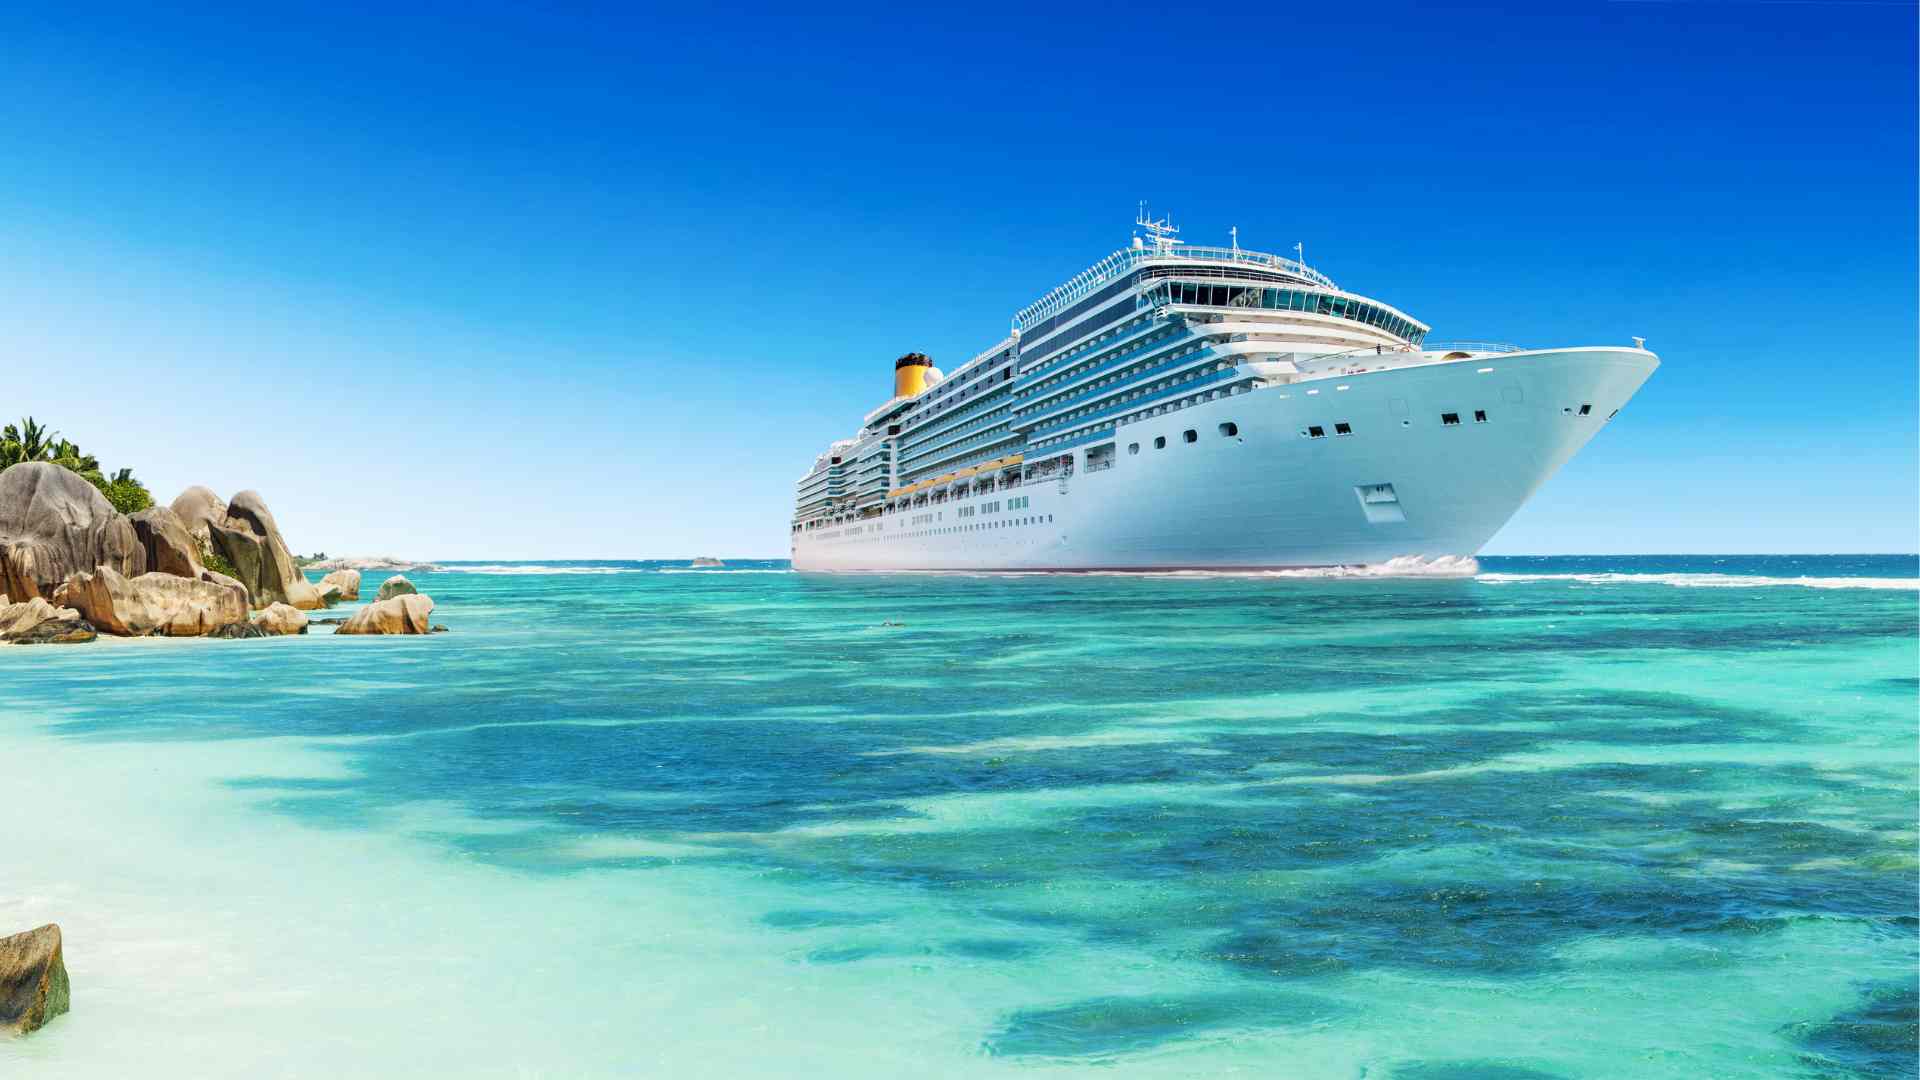 cruise lines ranked